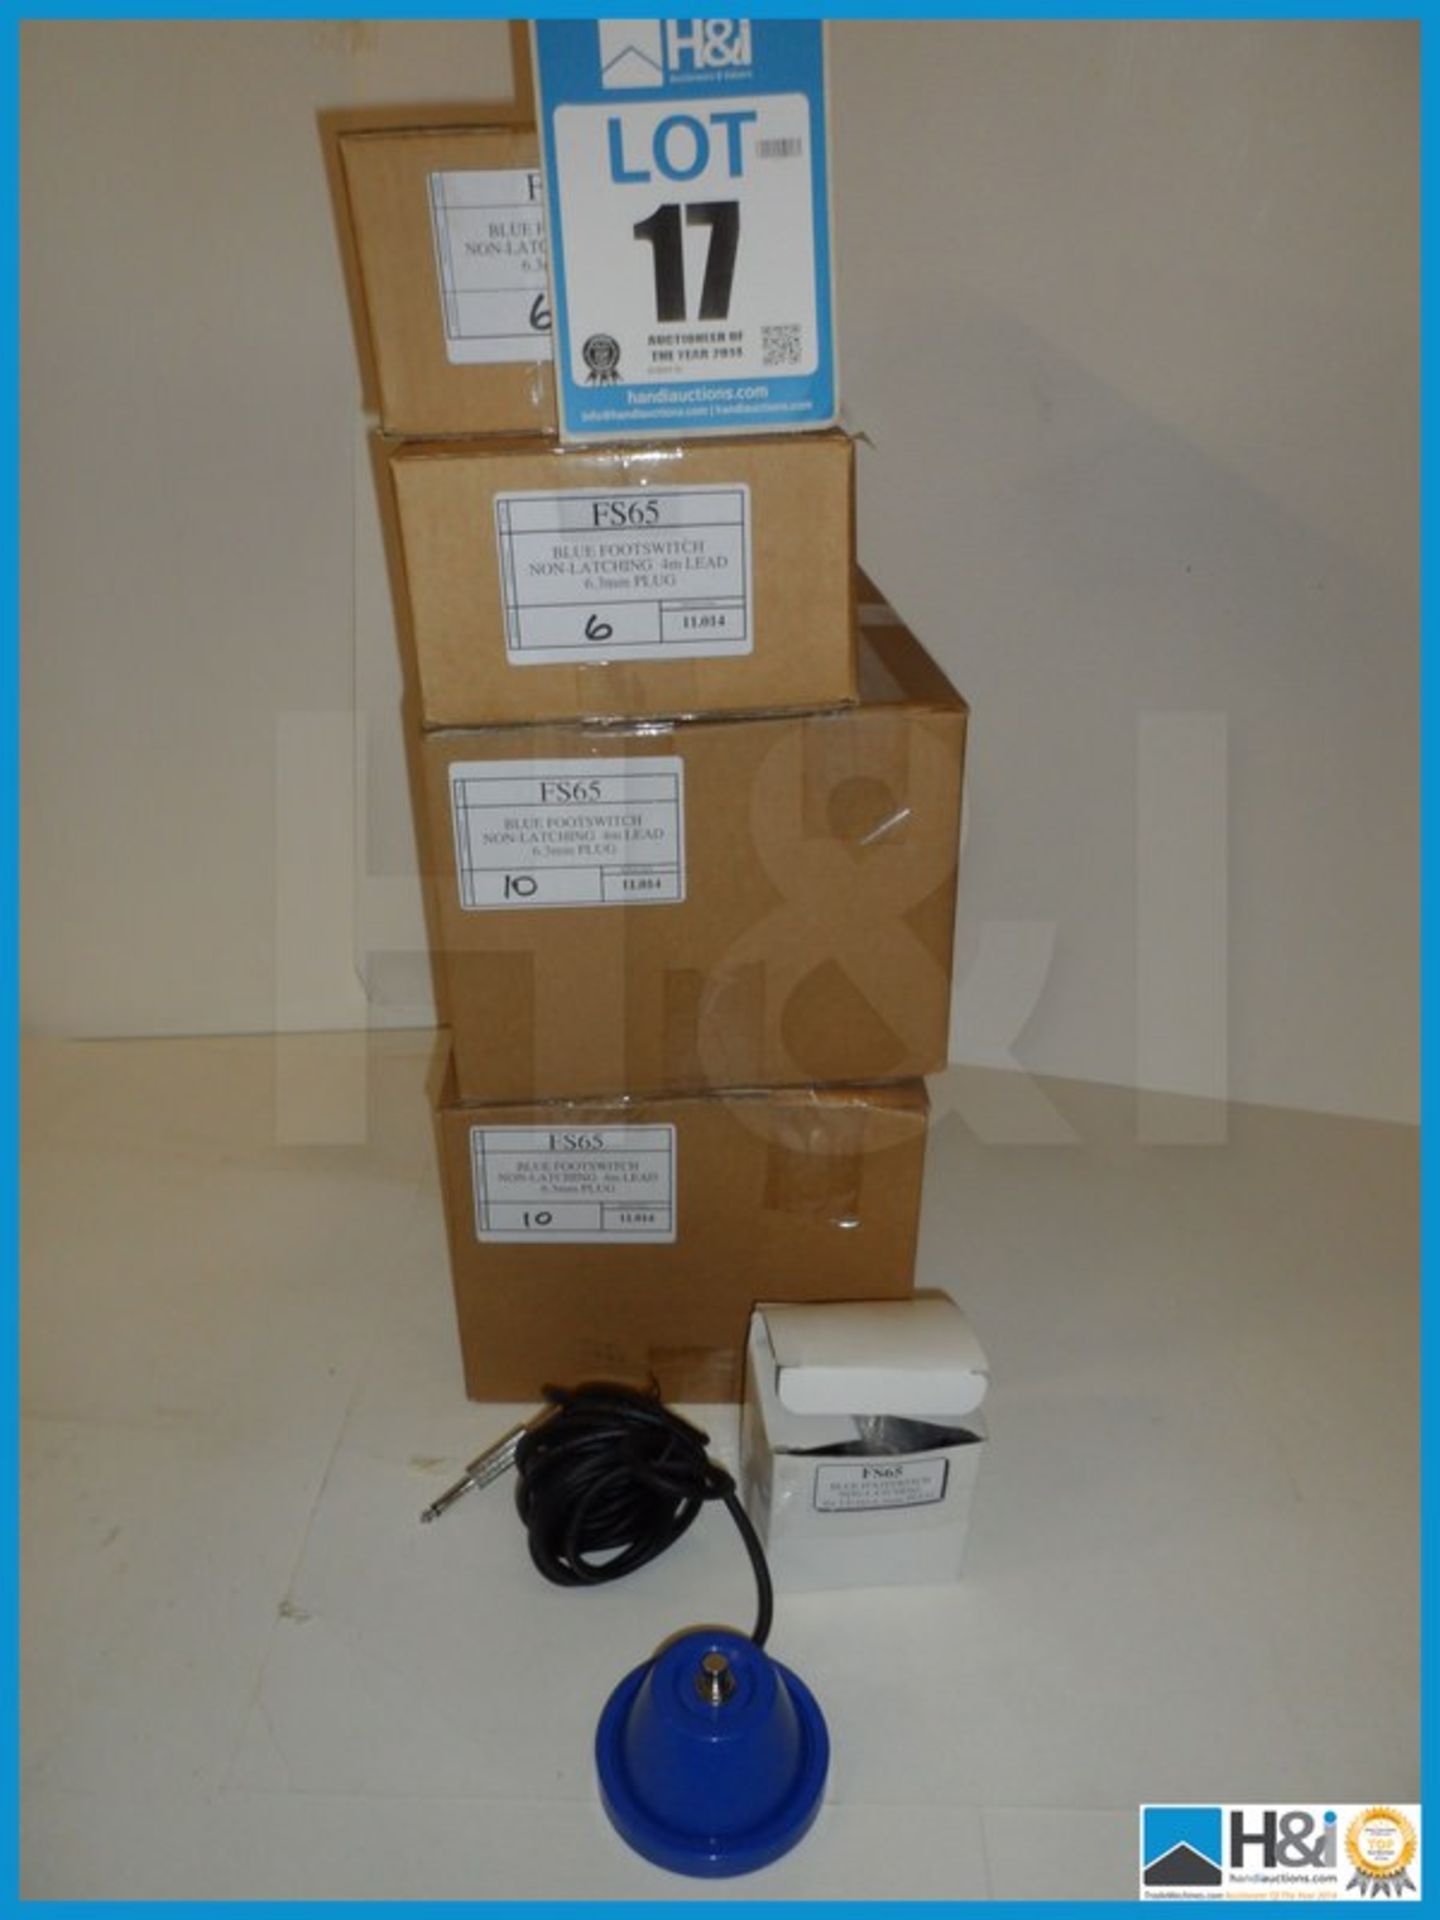 A03C BLUE FOOTSWITCH QTY X 33 LOT VALUE £242.55 + VAT. LIN BINS NOT INCLUDED. : FS65 - BLUE